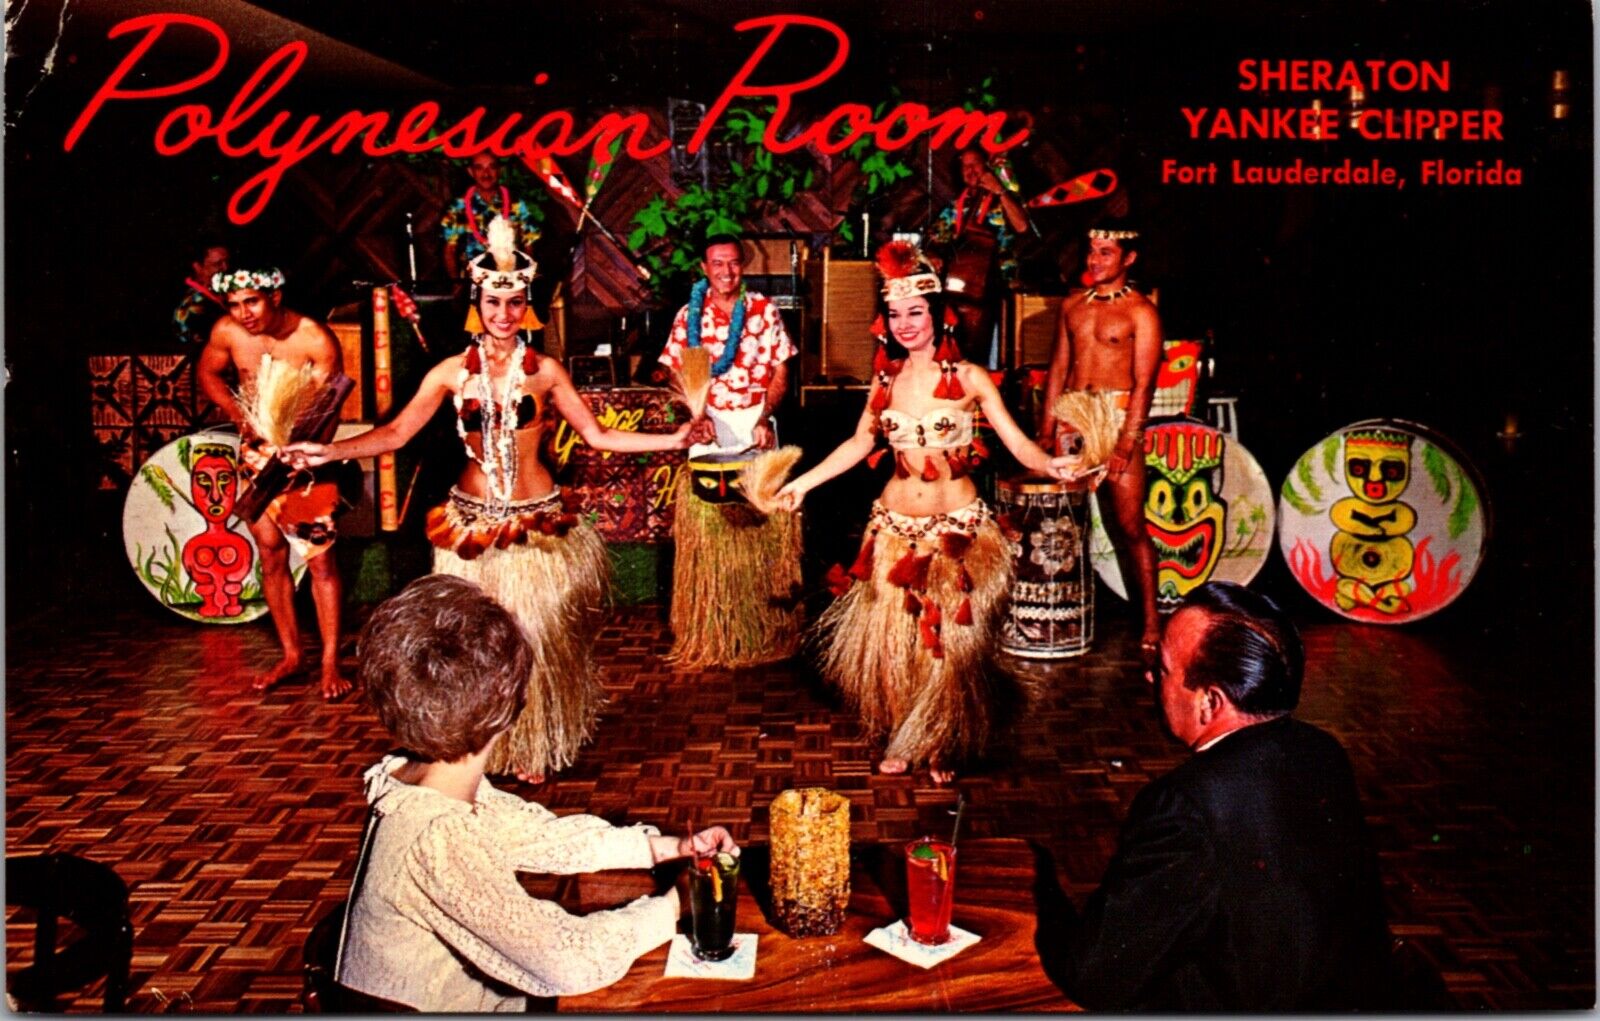 Postcard Polynesian Room at Sheraton Yankee Clipper in Fort Lauderdale, Florida